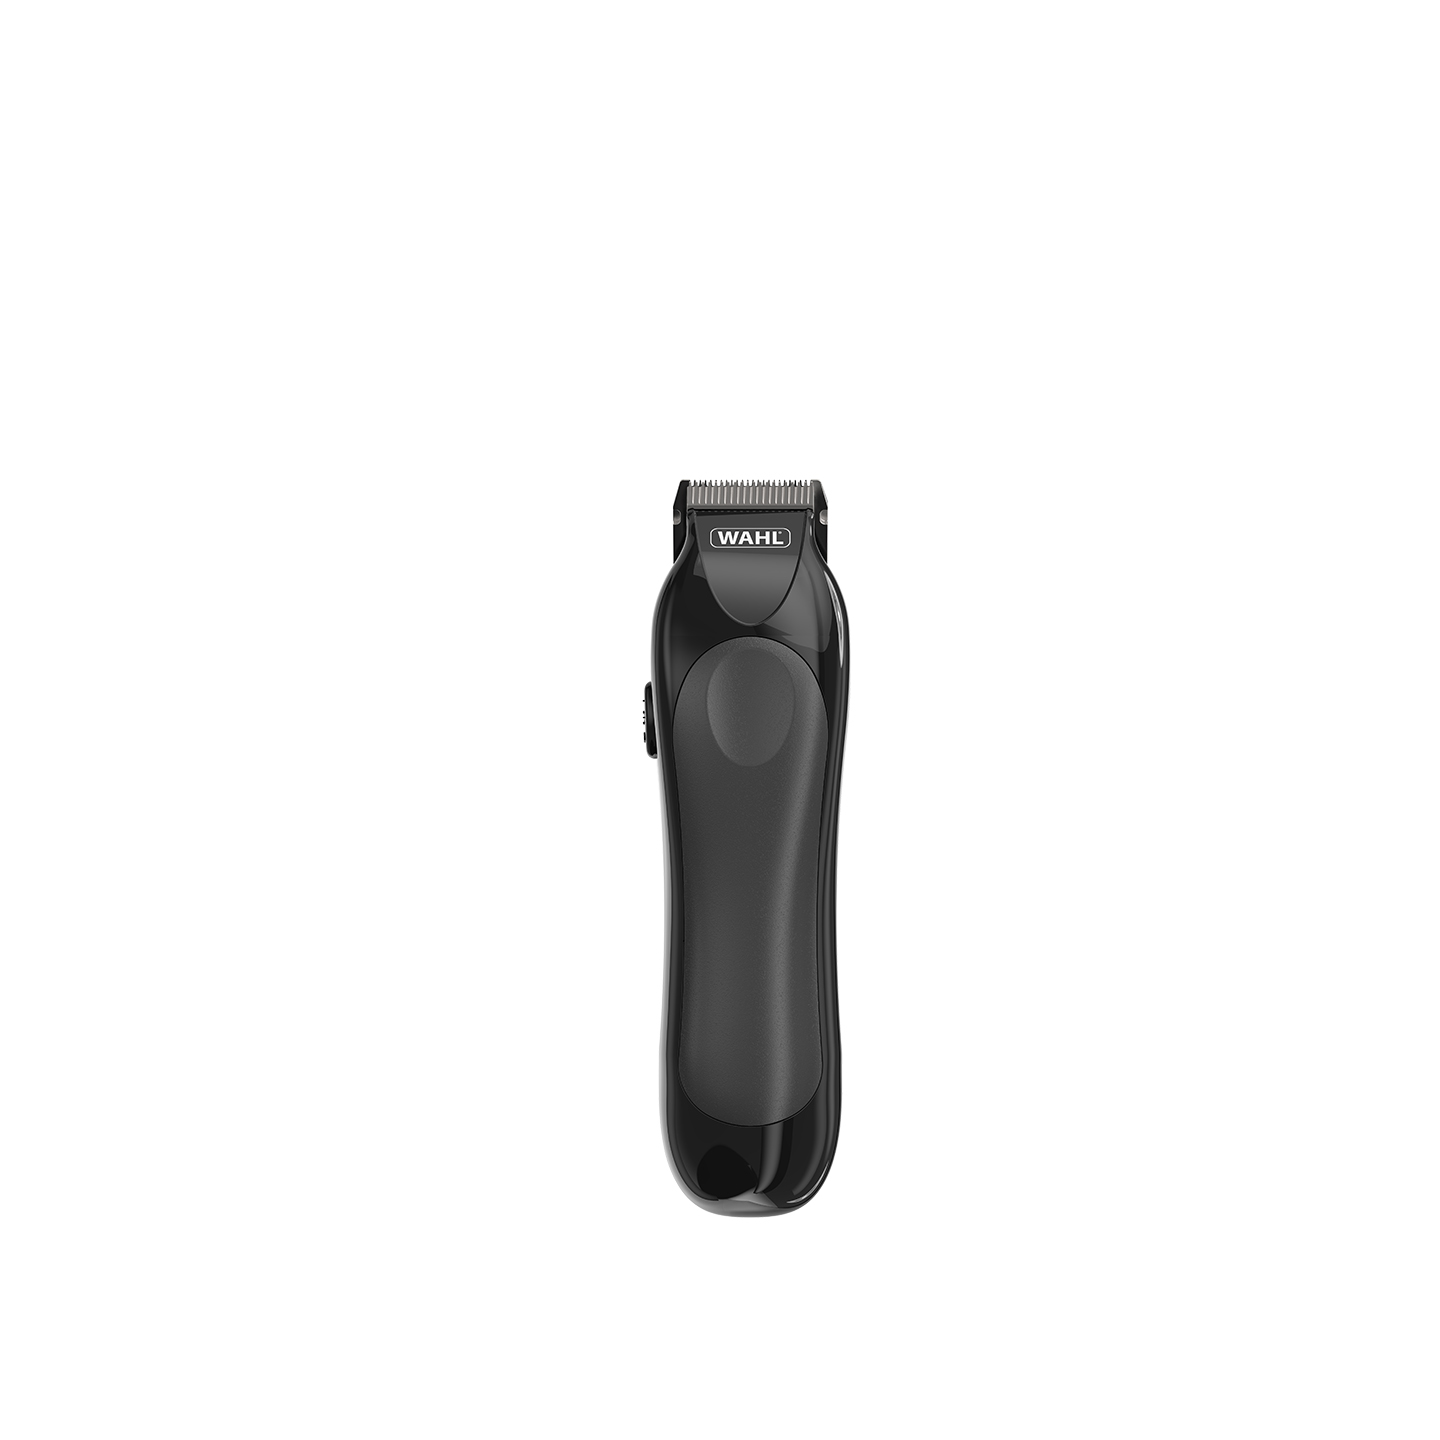 Wahl Mini Pro Cordless Trimmer | Pocket Sized | Best for Travel